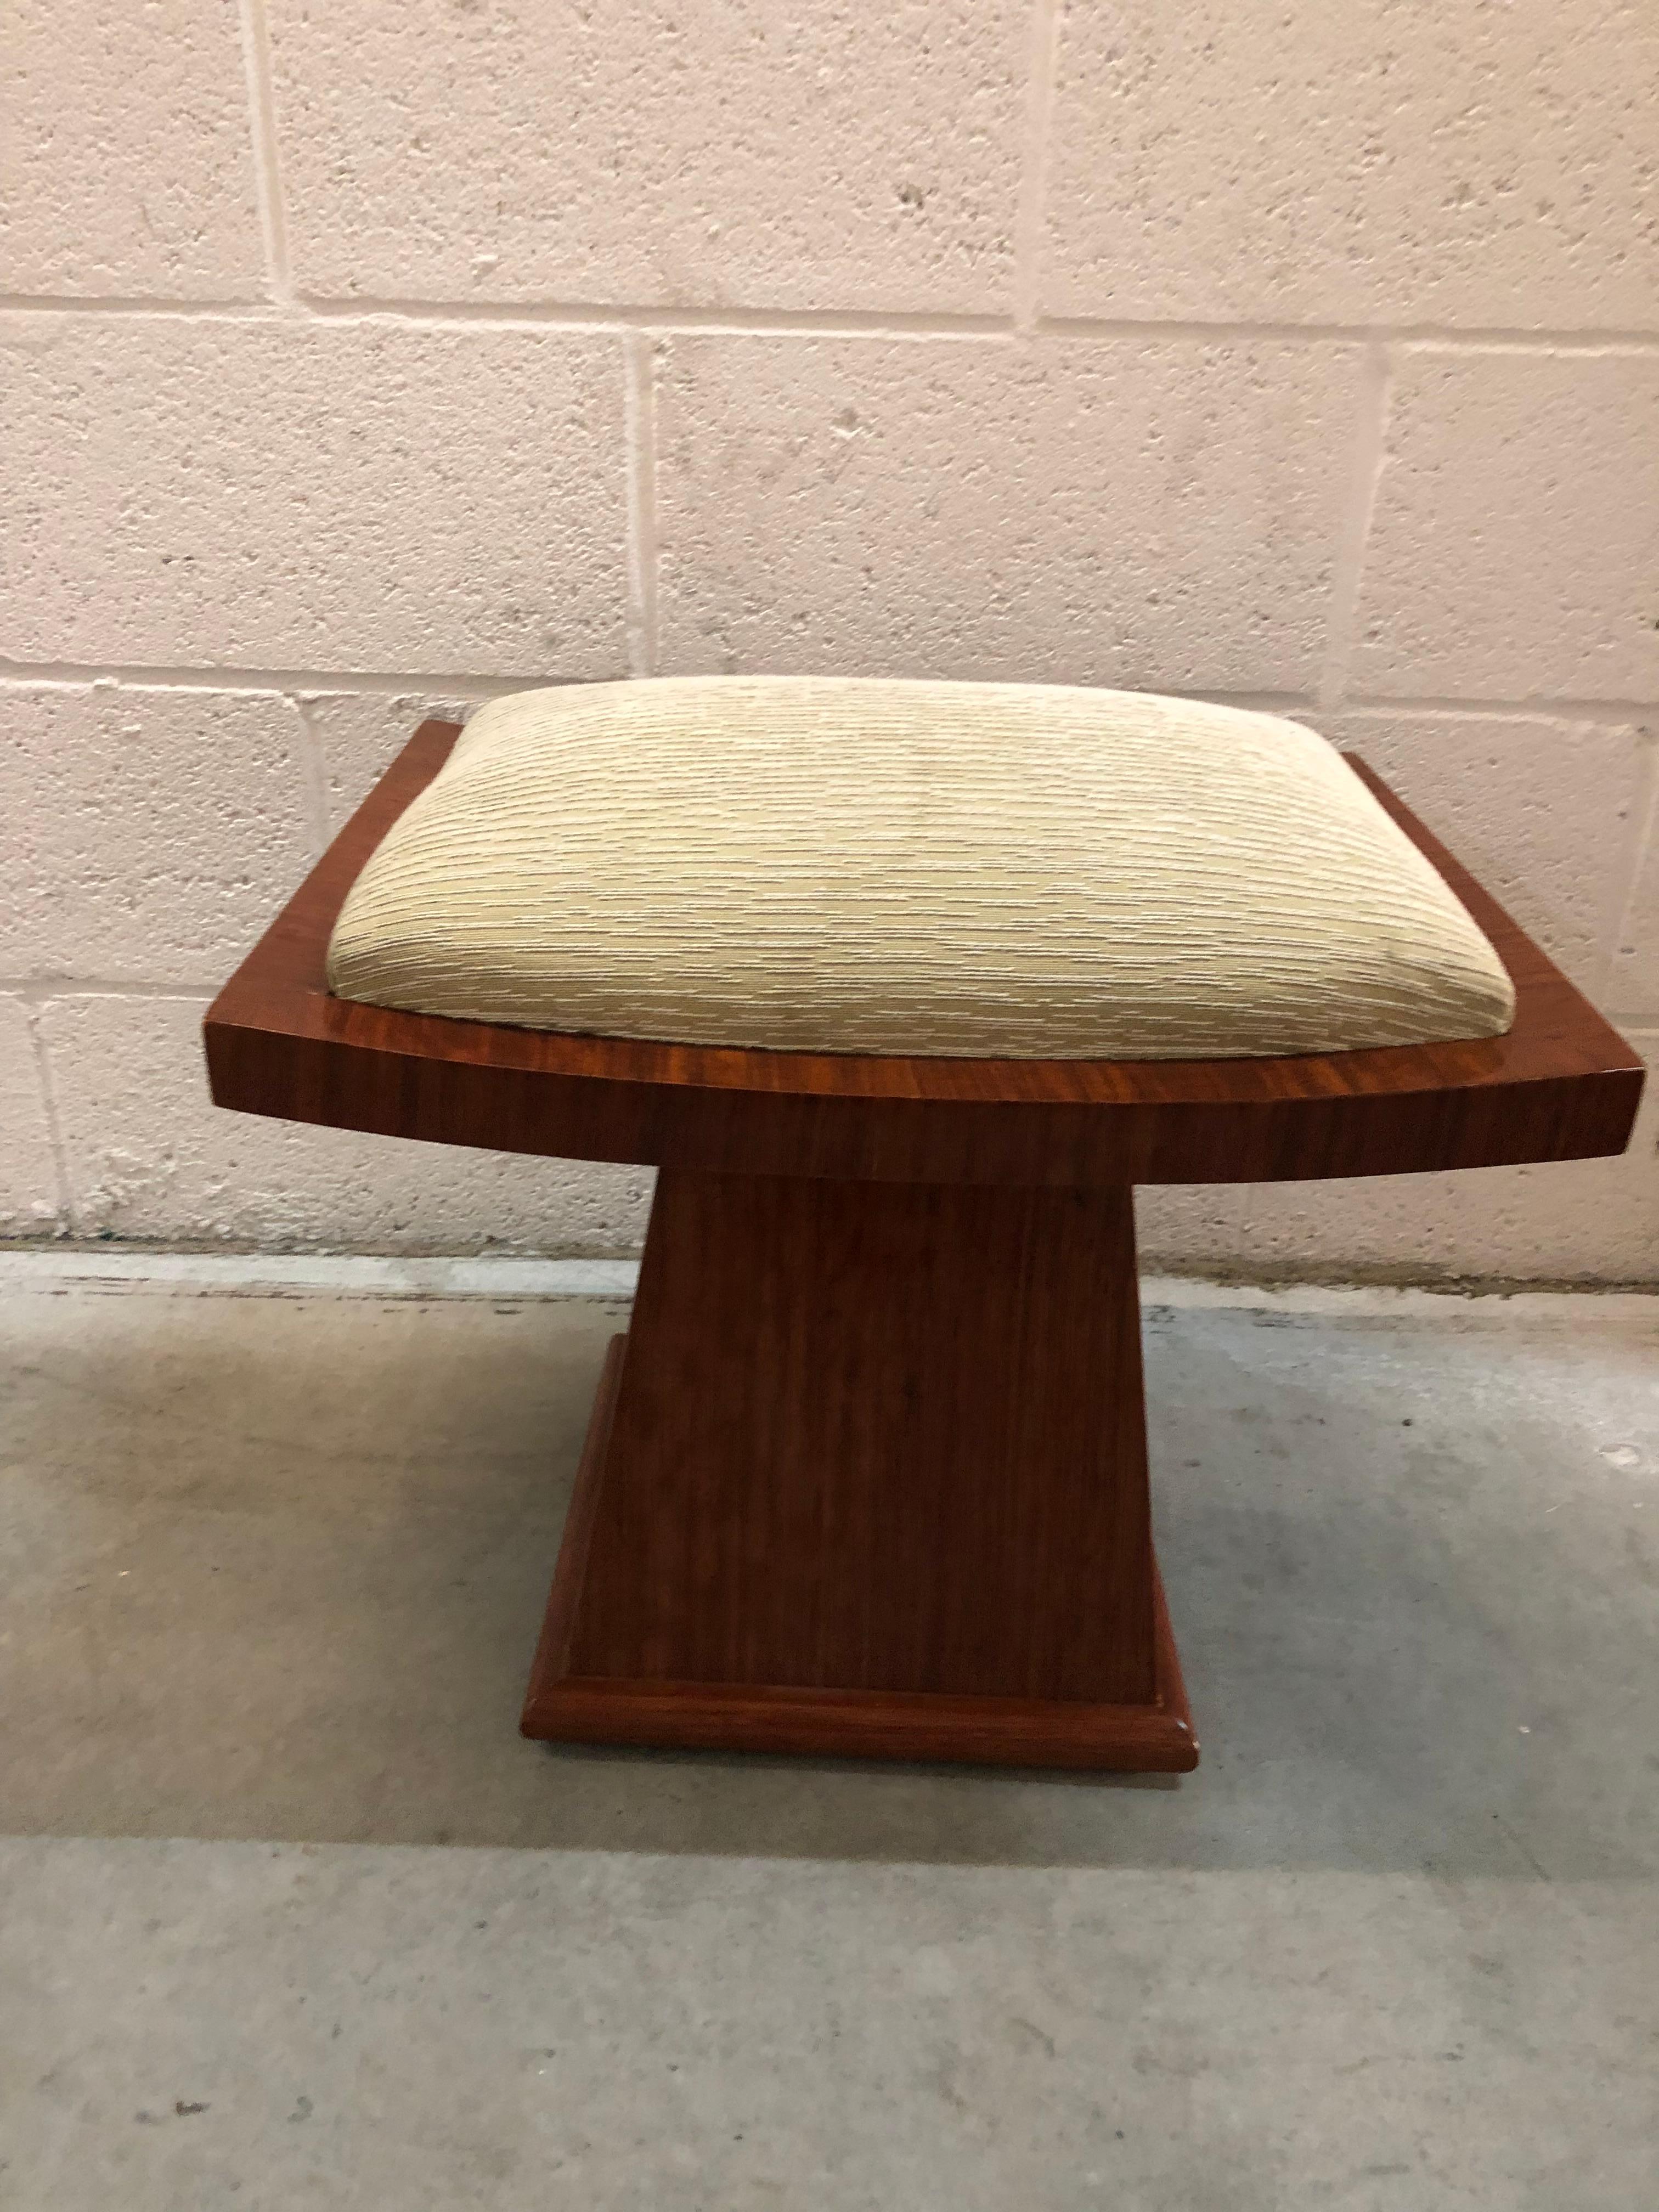 Stools Art Deco.
Material: wood 
You want to live in the golden years, this is the stool that your project needs.
We have specialized in the sale of Art Deco and Art Nouveau styles since 1982.If you have any questions we are at your